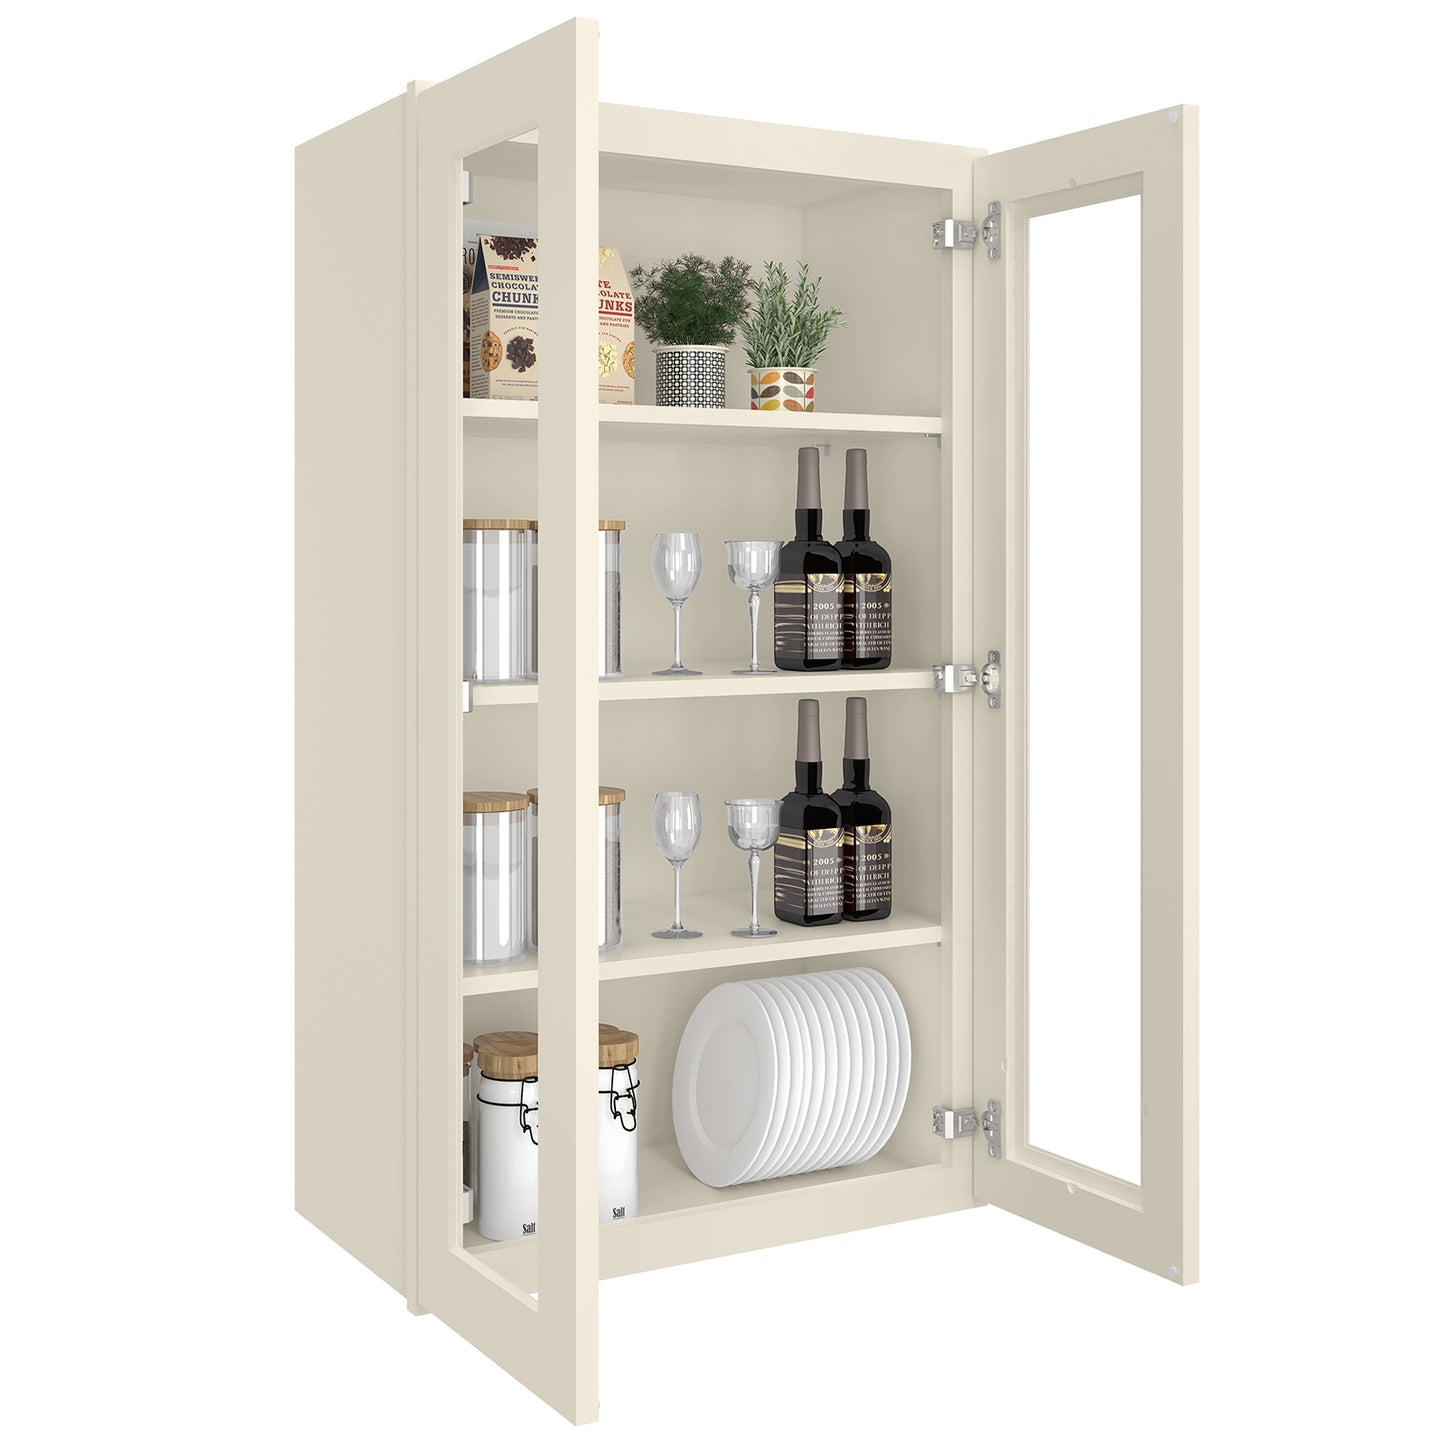 Medicine Cabinet Wall Mounted W2442GD